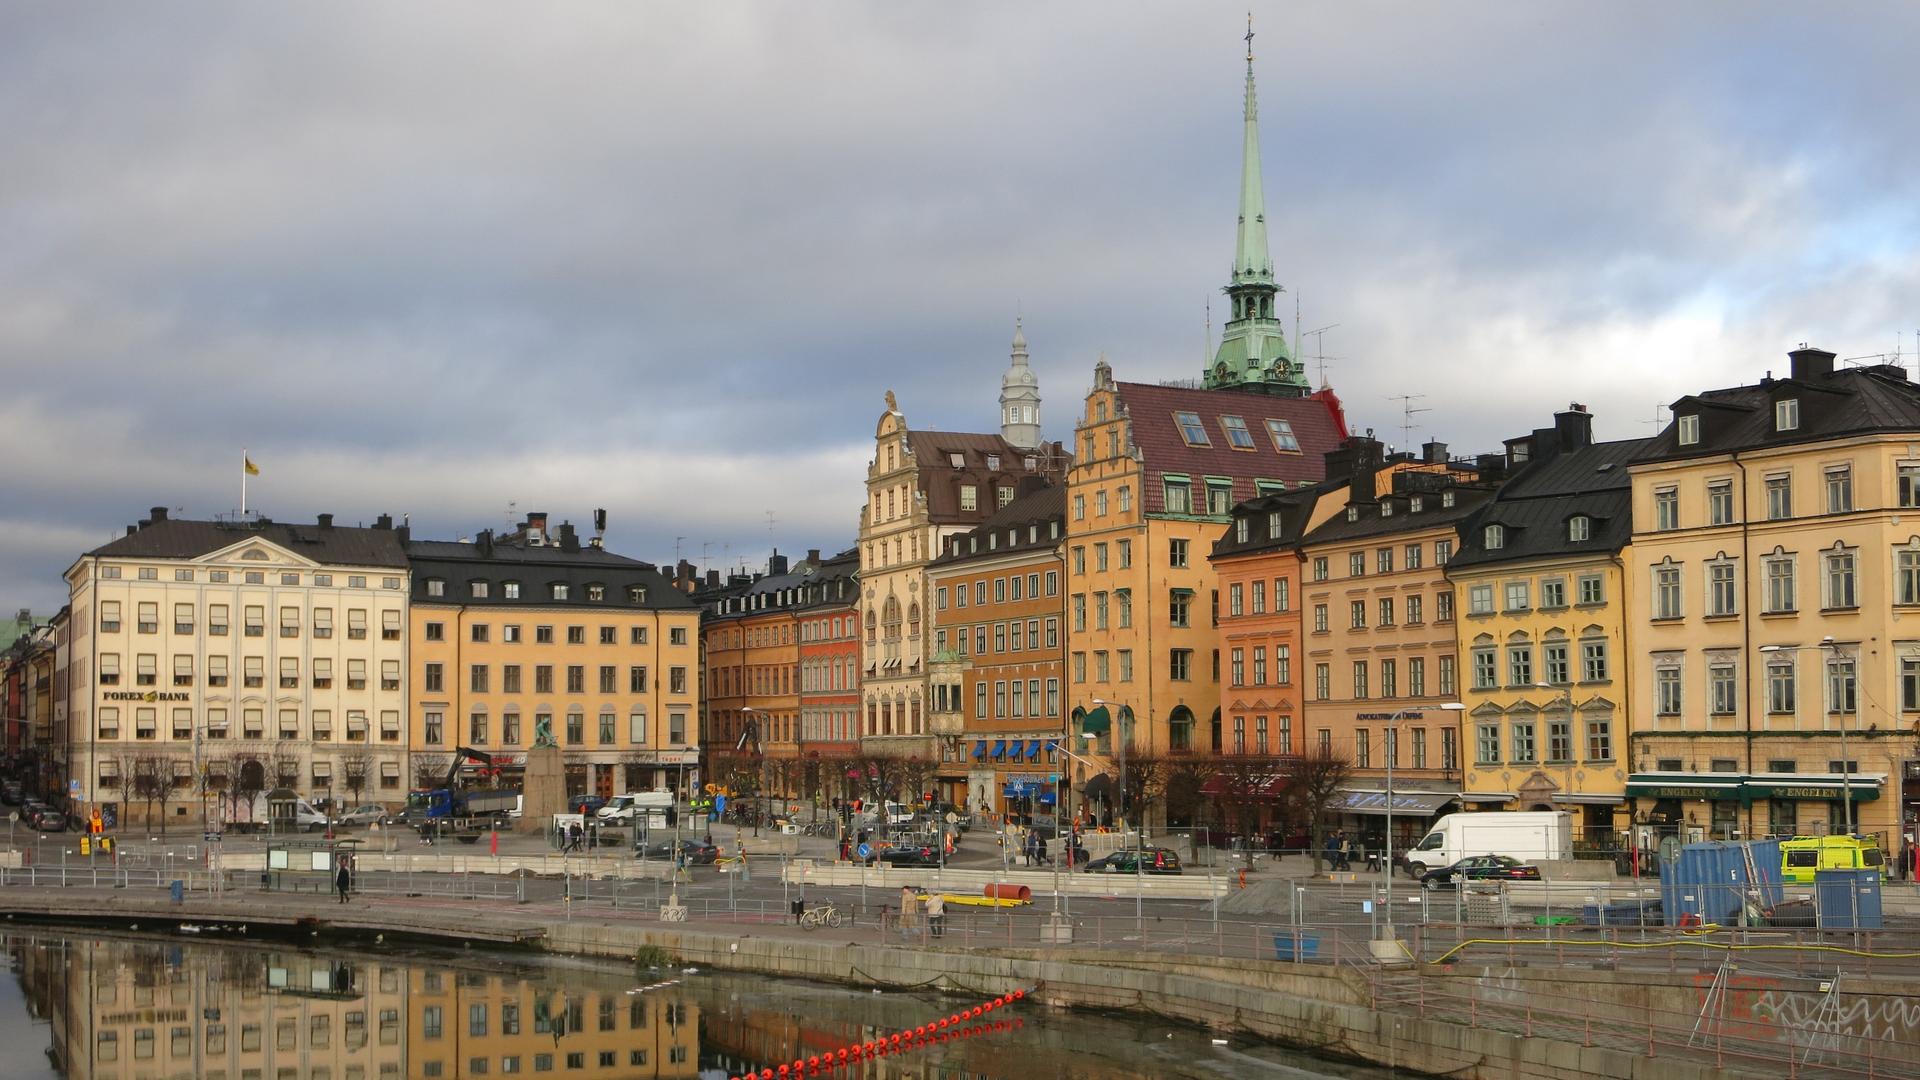 Stockholm's old town, the island of Gamla Stan.